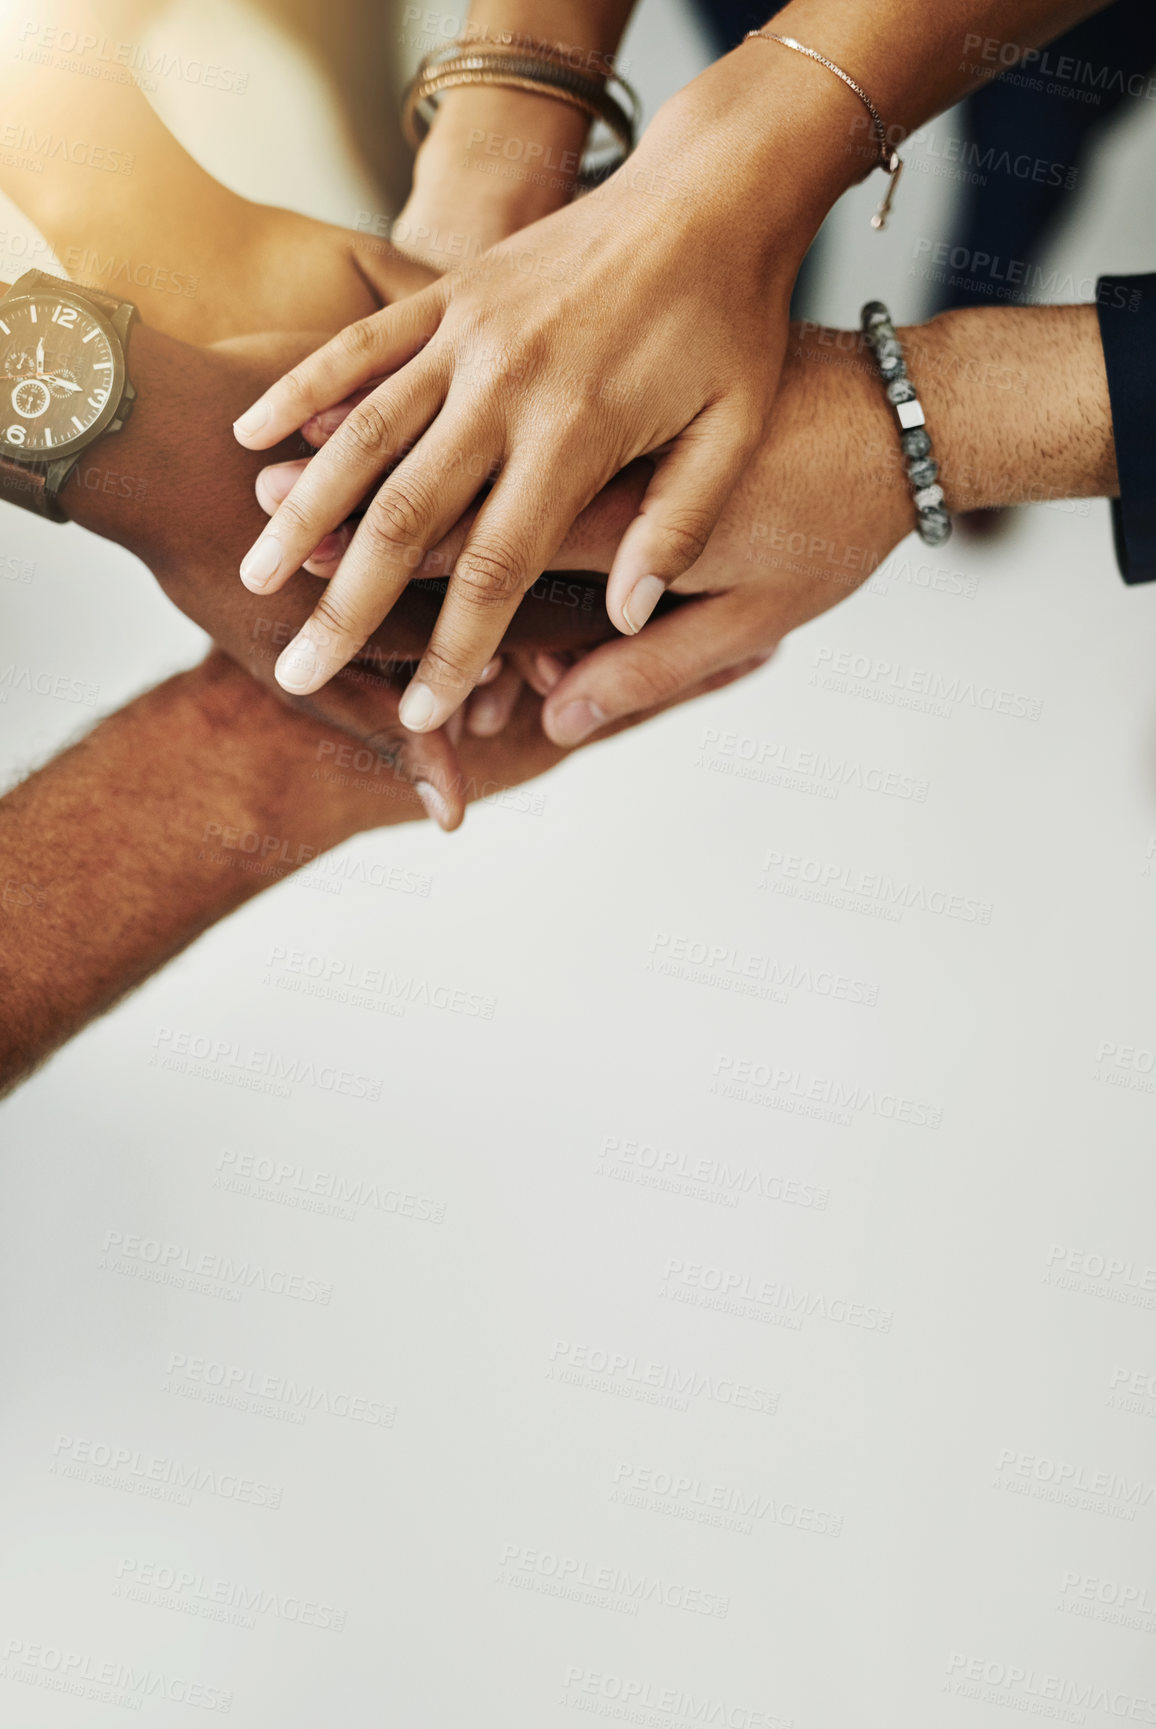 Buy stock photo Hands in a huddle for teamwork, unity and working together from above. Closeup of a diverse group or team collaborating, joining and connected as a united people, showing solidarity and cooperation